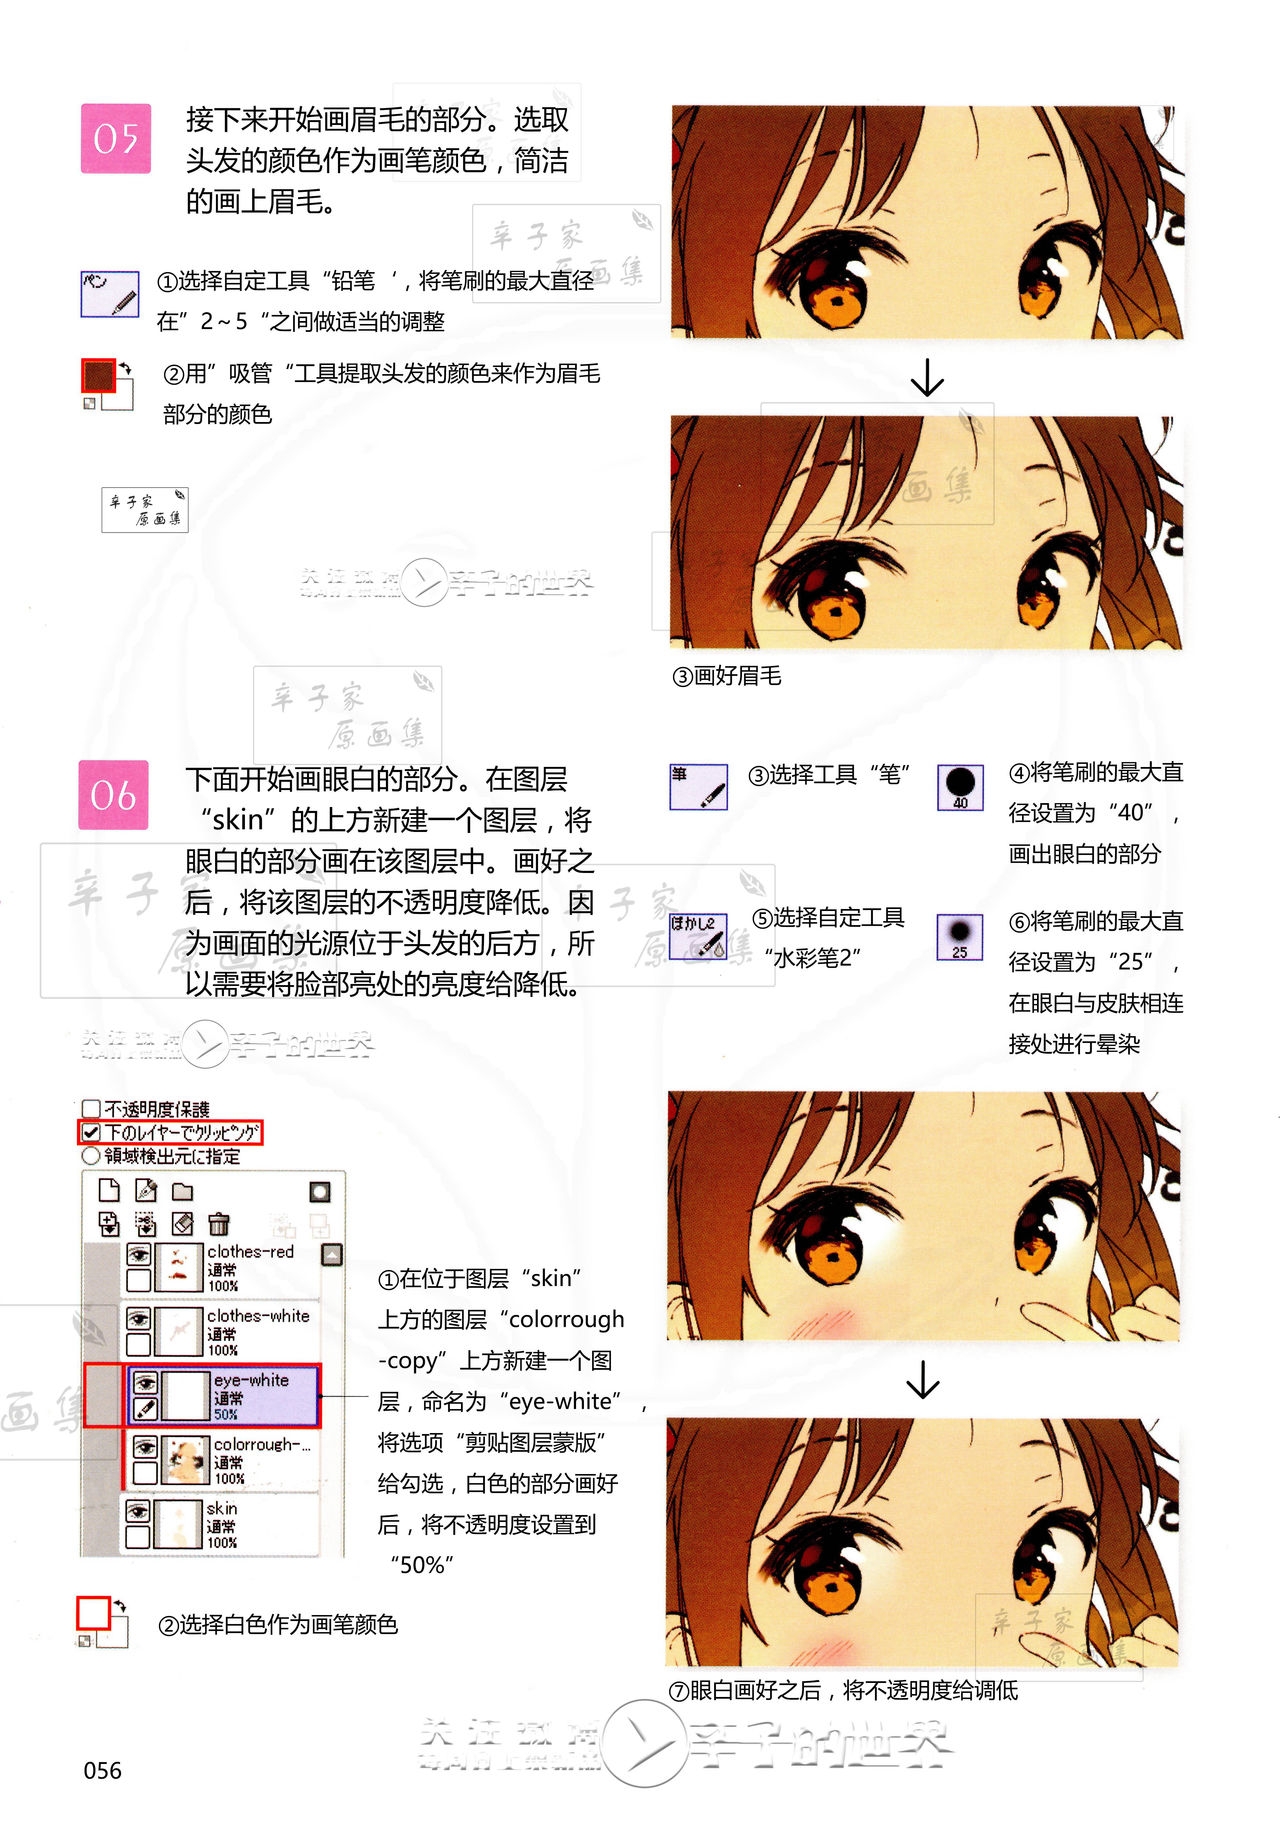 [Anmi] Lets Make ★ Character CG illustration techniques vol.9 [Chinese] 54